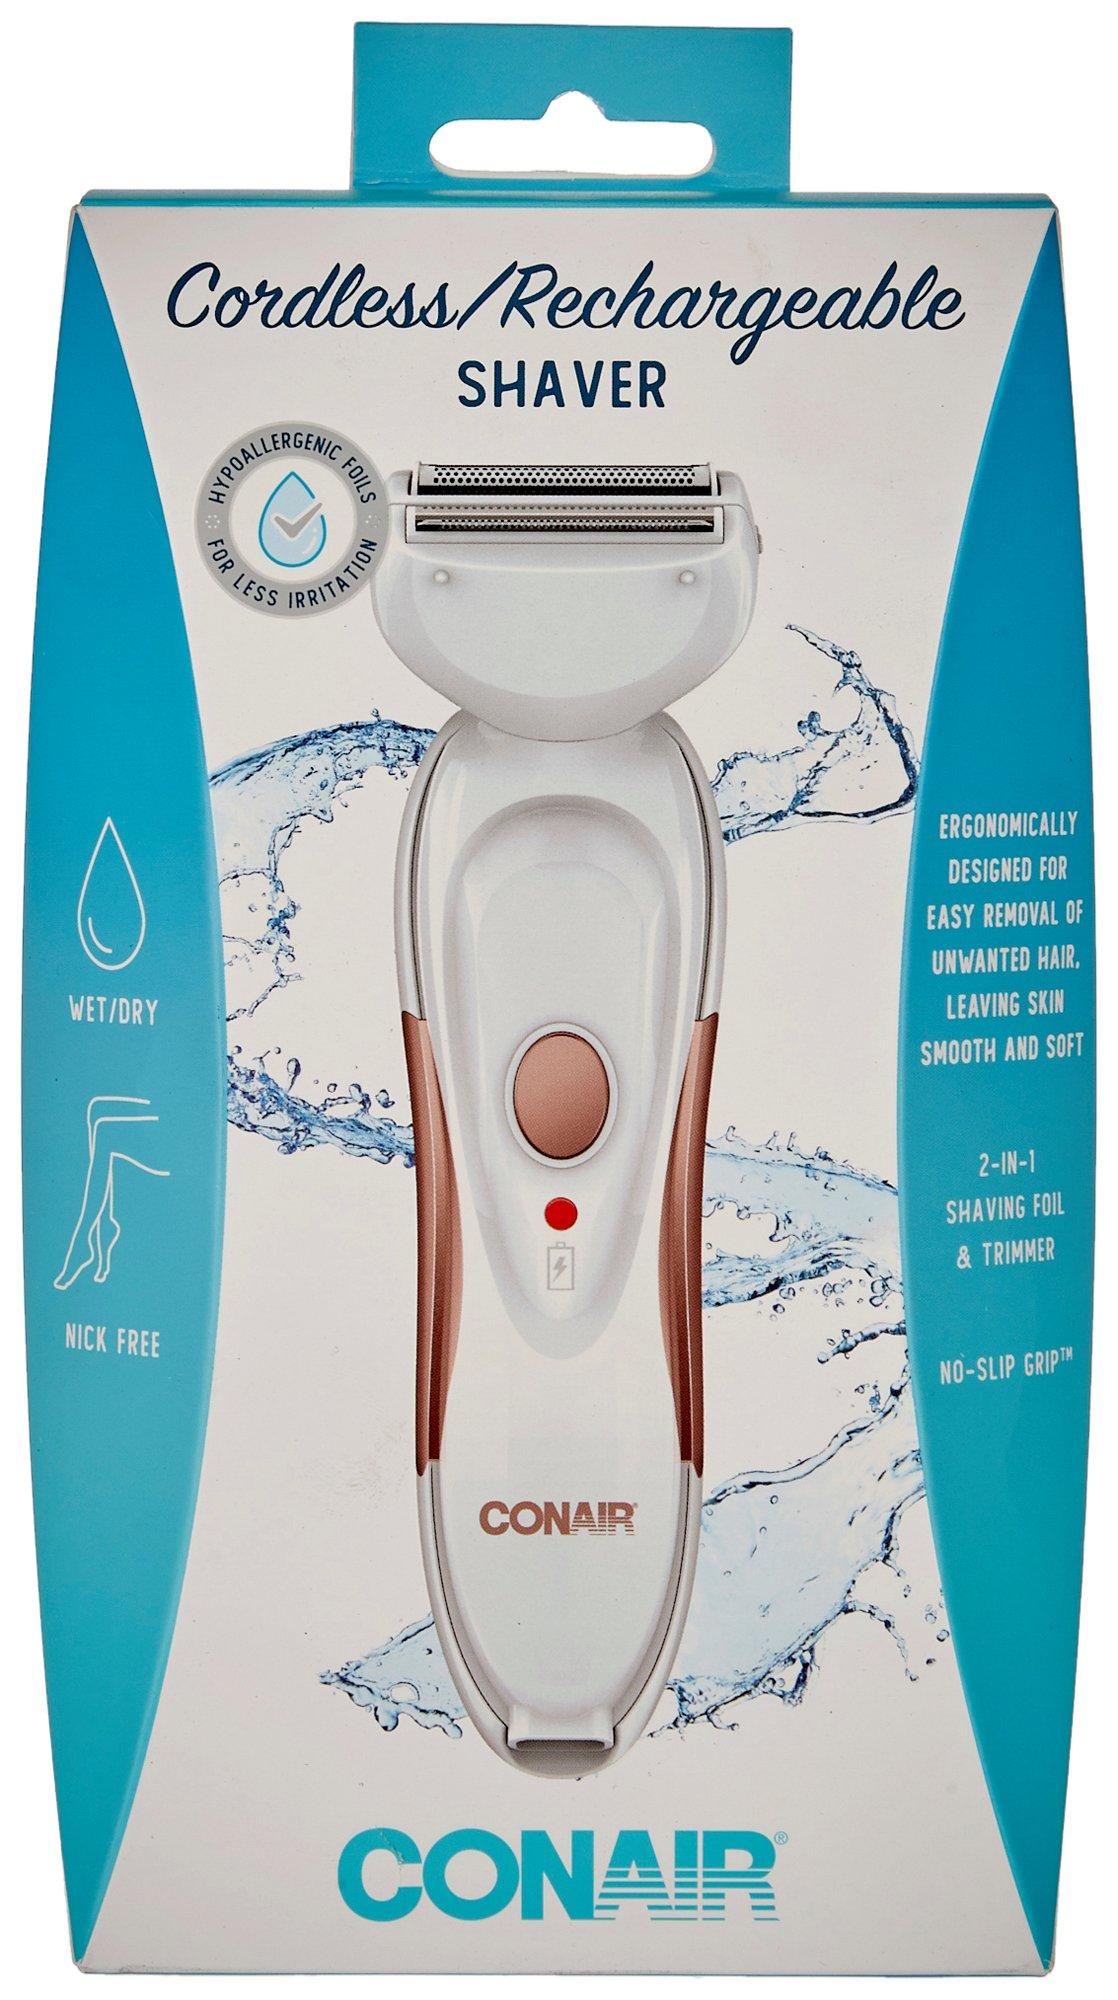 Conair Cordless Rechargeable 2-In-1 Shaver